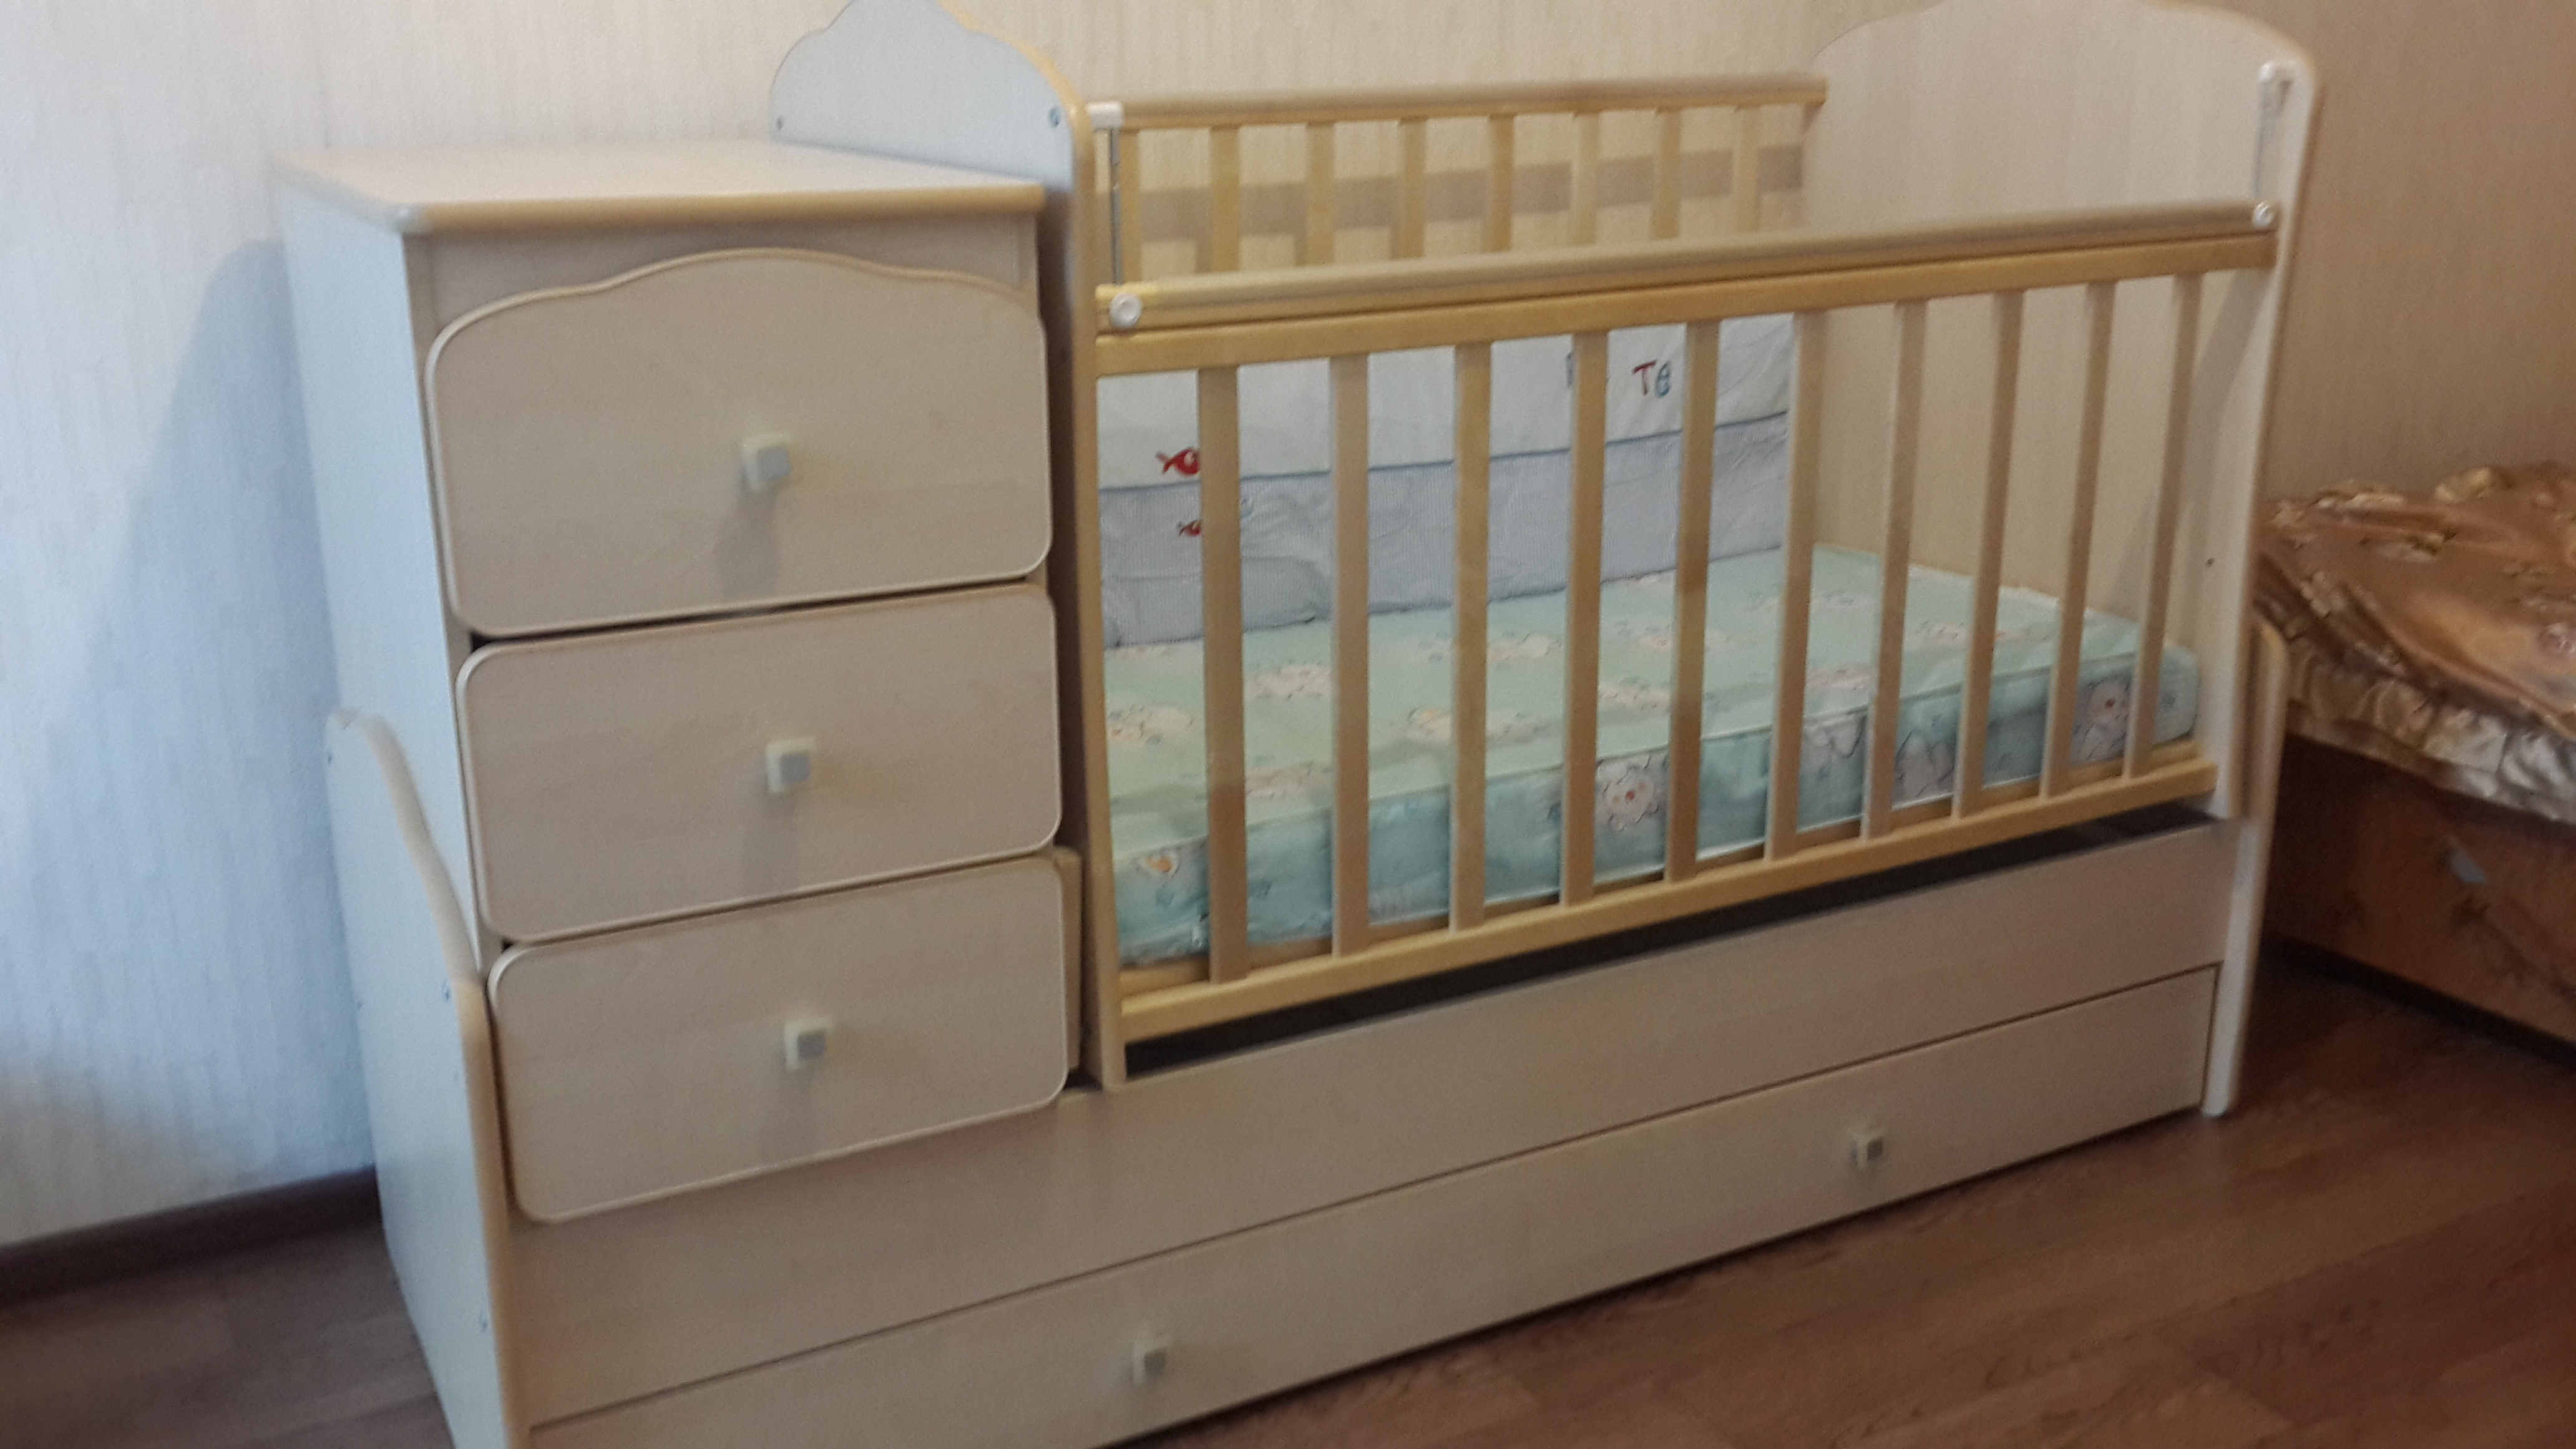 Children's bed a transformer with a changing table